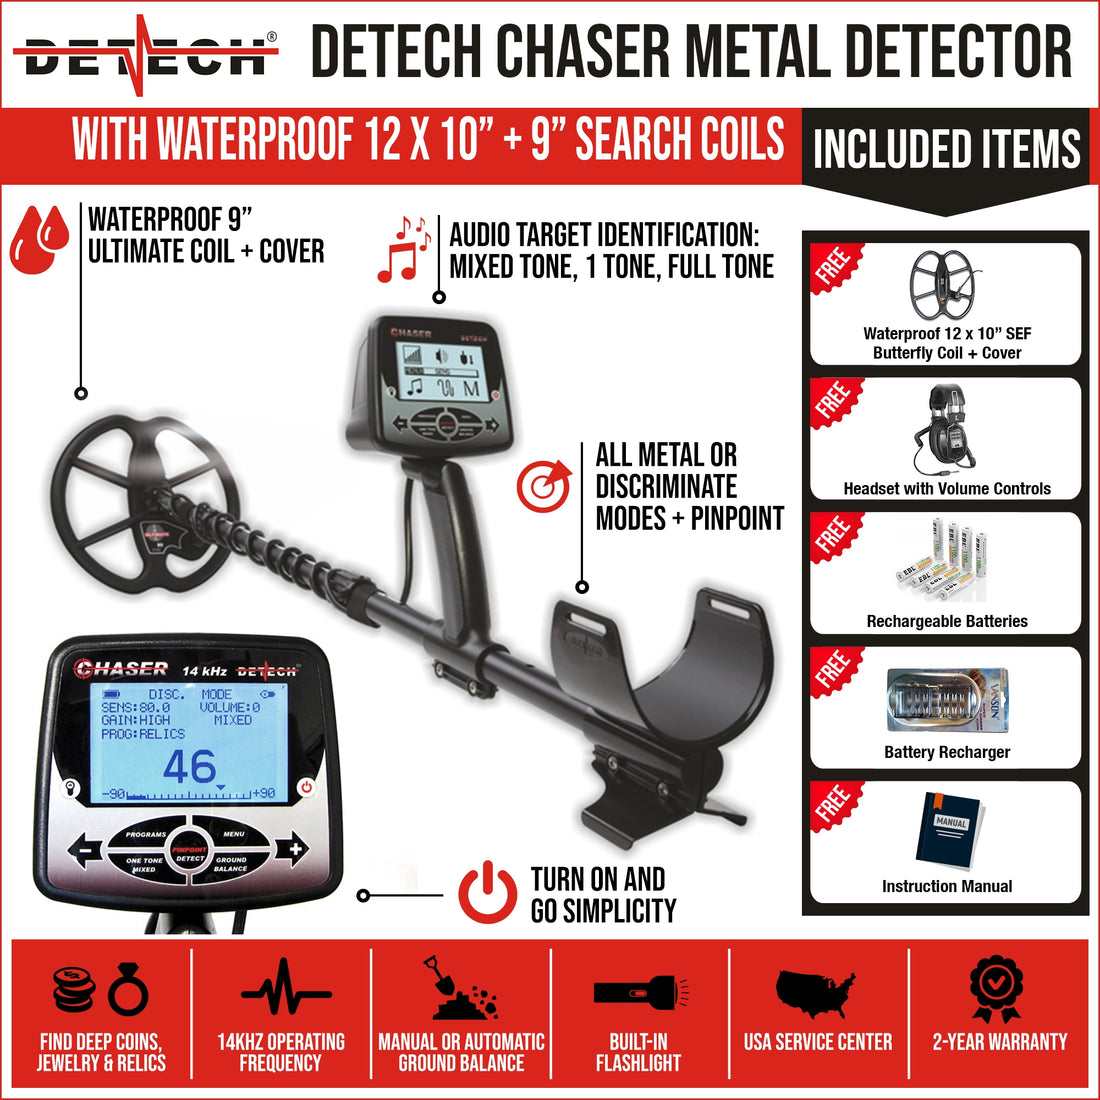 Detech Chaser Metal Detector with 12" x 10" SEF Butterfly Coil + 9" Ultimate Coil + Bonus Pack